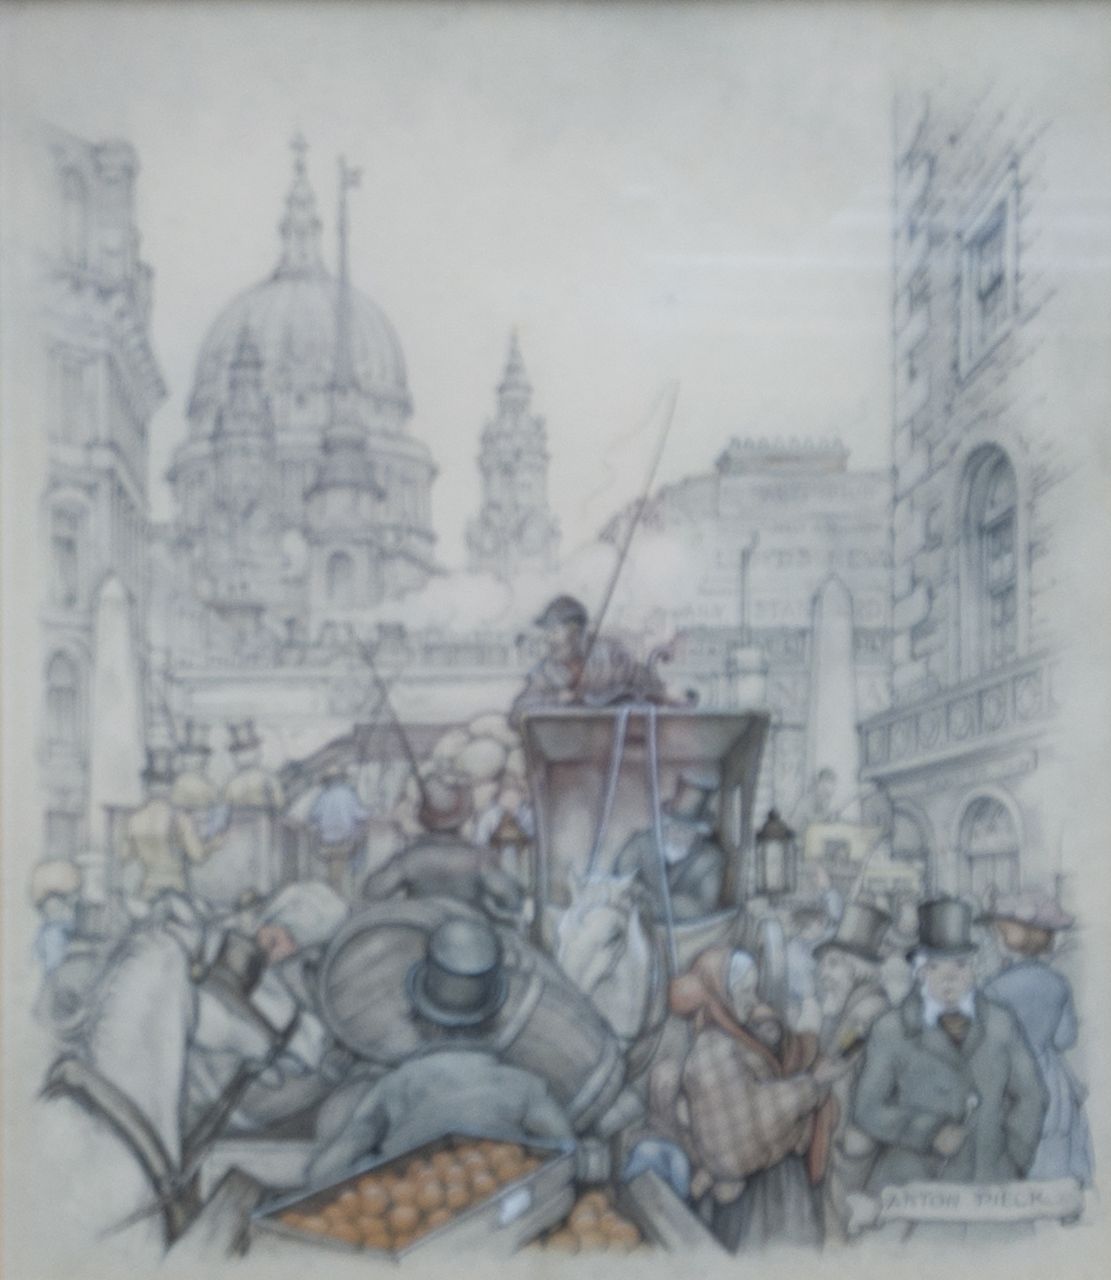 Pieck A.F.  | 'Anton' Franciscus Pieck, Carriages in Fleet Street, London, pencil and watercolour on paper 23.2 x 19.3 cm, signed l.r.